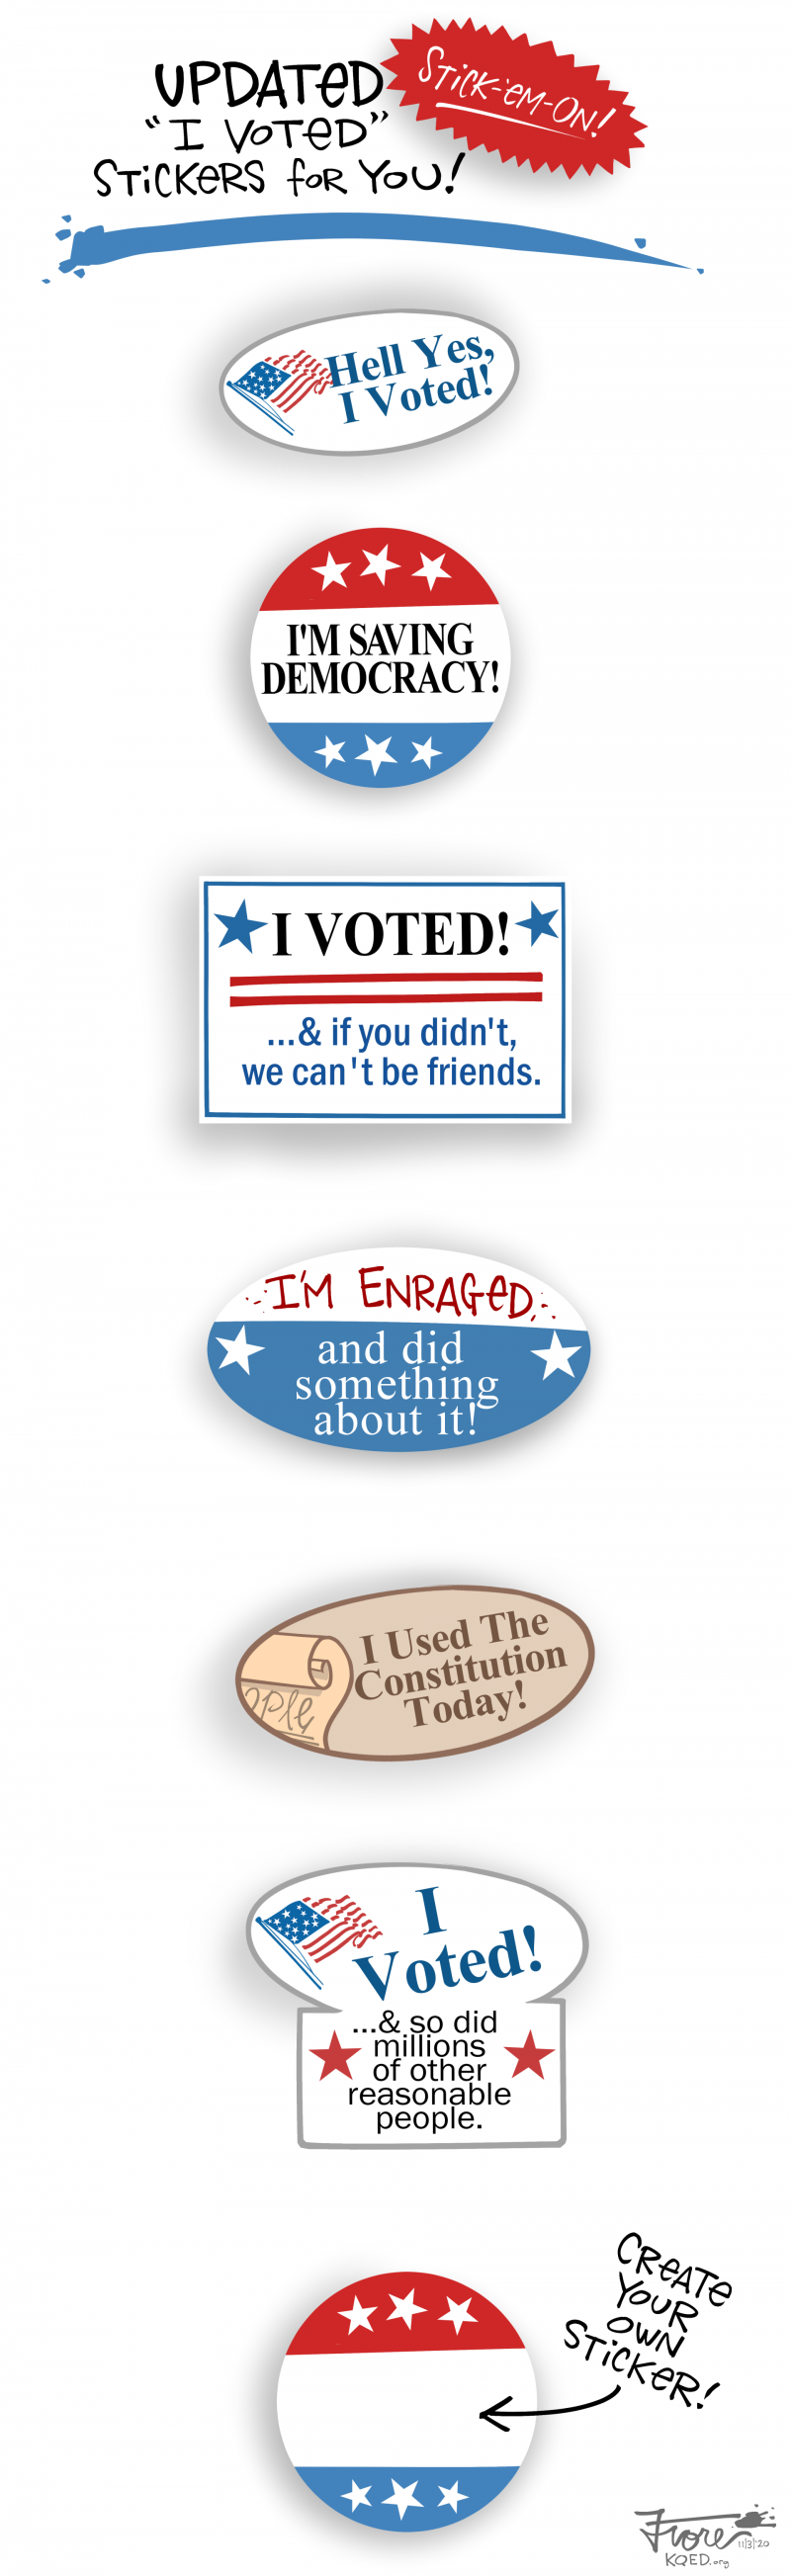 Cartoon: New 'I Voted' Stickers by Mark Fiore